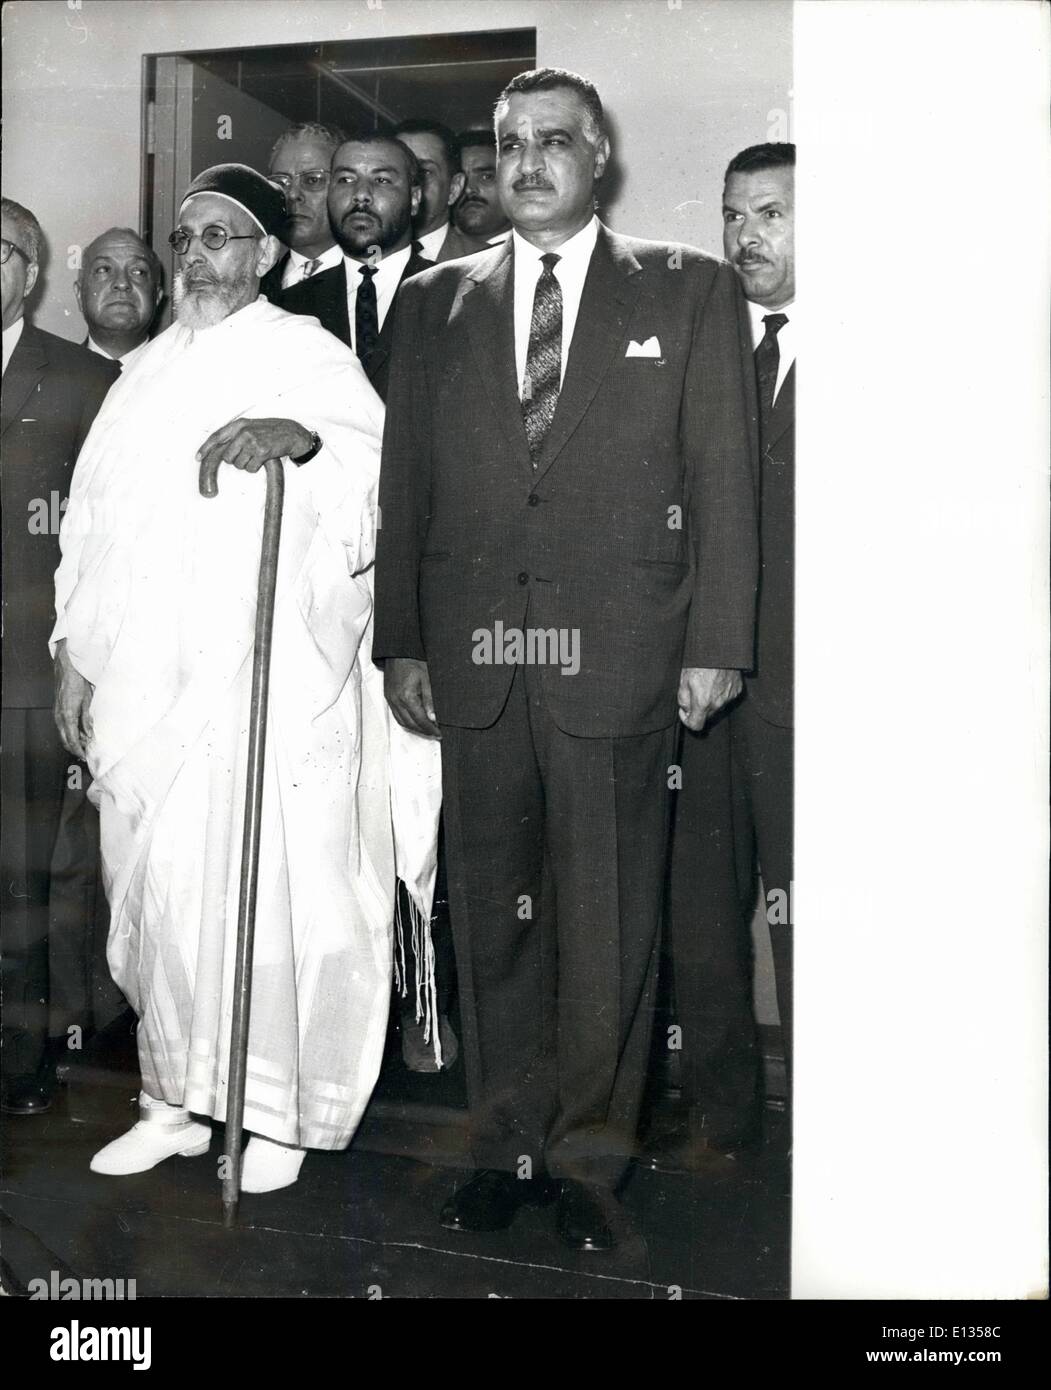 Feb. 28, 2012 - Old friends Nasser and King Idris: While deposed Libyan ruler King Idris waits in Greece for developments in his own country, he must also remembers the days when was a close friend of Egypt's President Nasser. Will Nasser change his attitude and support the old king, or will he stand back and even actively support the new revolutionary party in Libya? This stock picture well illustrates the old friendship and was taken in 1914 when the King was welcomed in Cairo and Alexandria for an Arab Summit meeting. Stock Photo